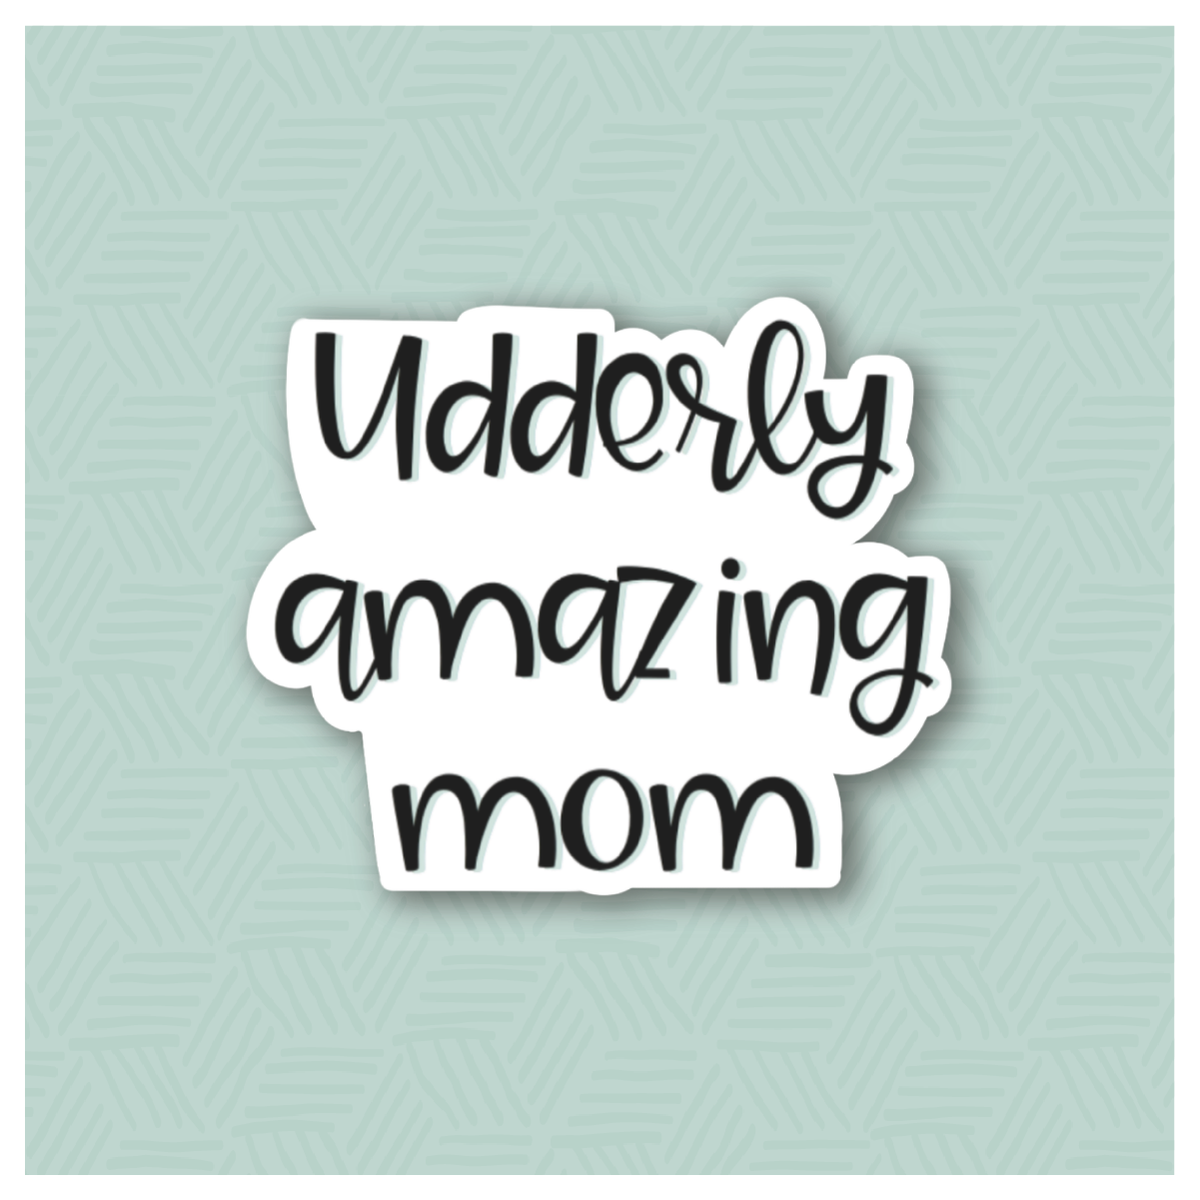 Udderly Amazing Mom Hand Lettered Cookie Cutter